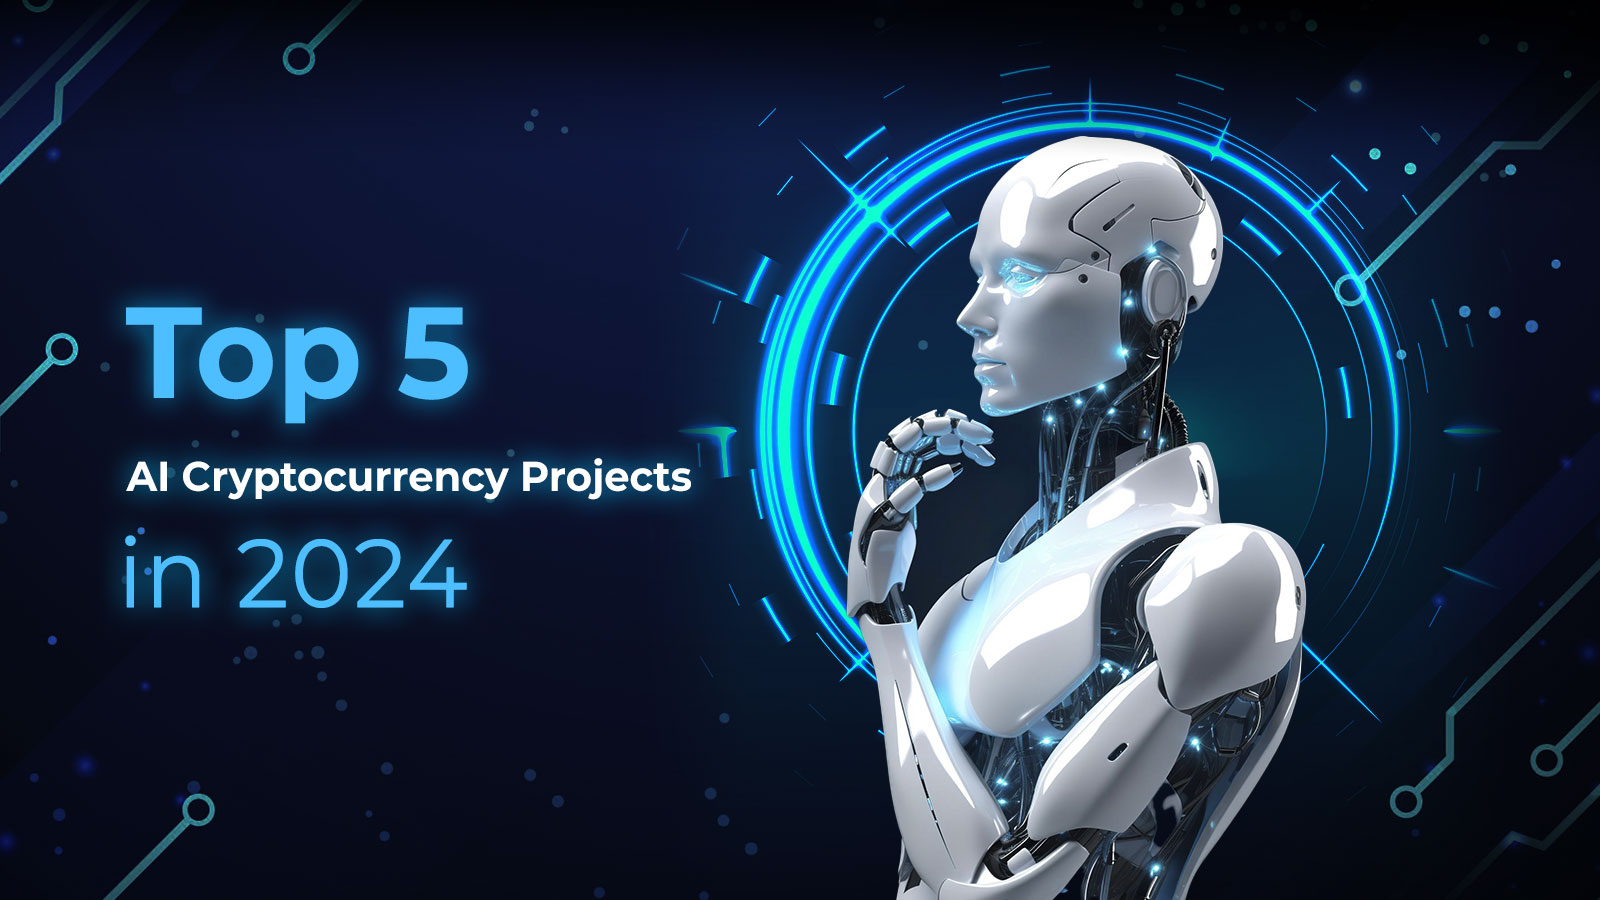 Top 5 AI Cryptocurrency Projects in 2024